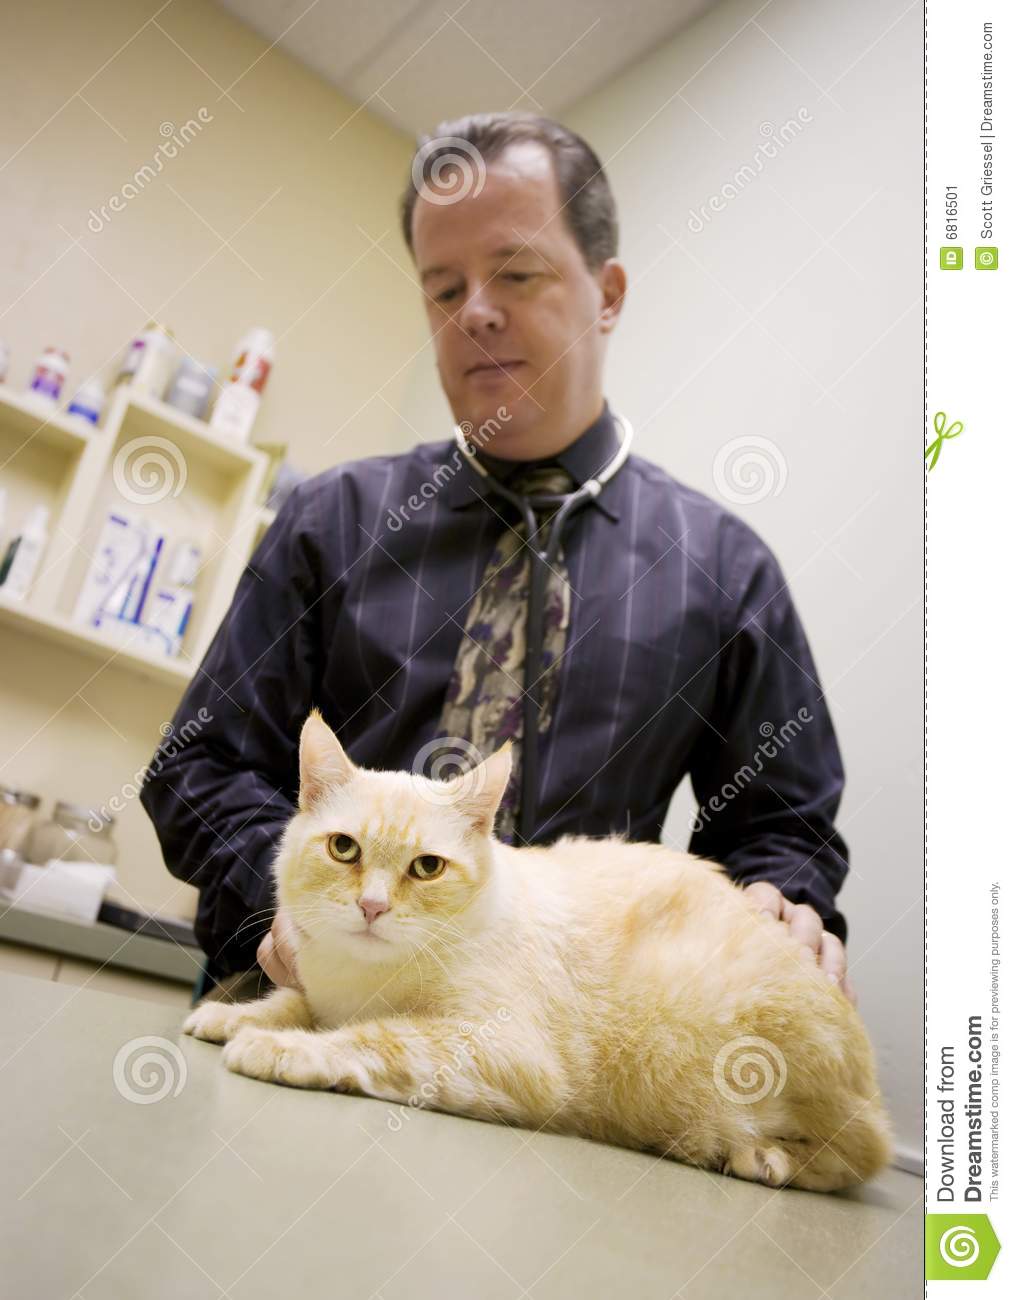 Cat In A Veterinary Office Stock Image   Image  6816501